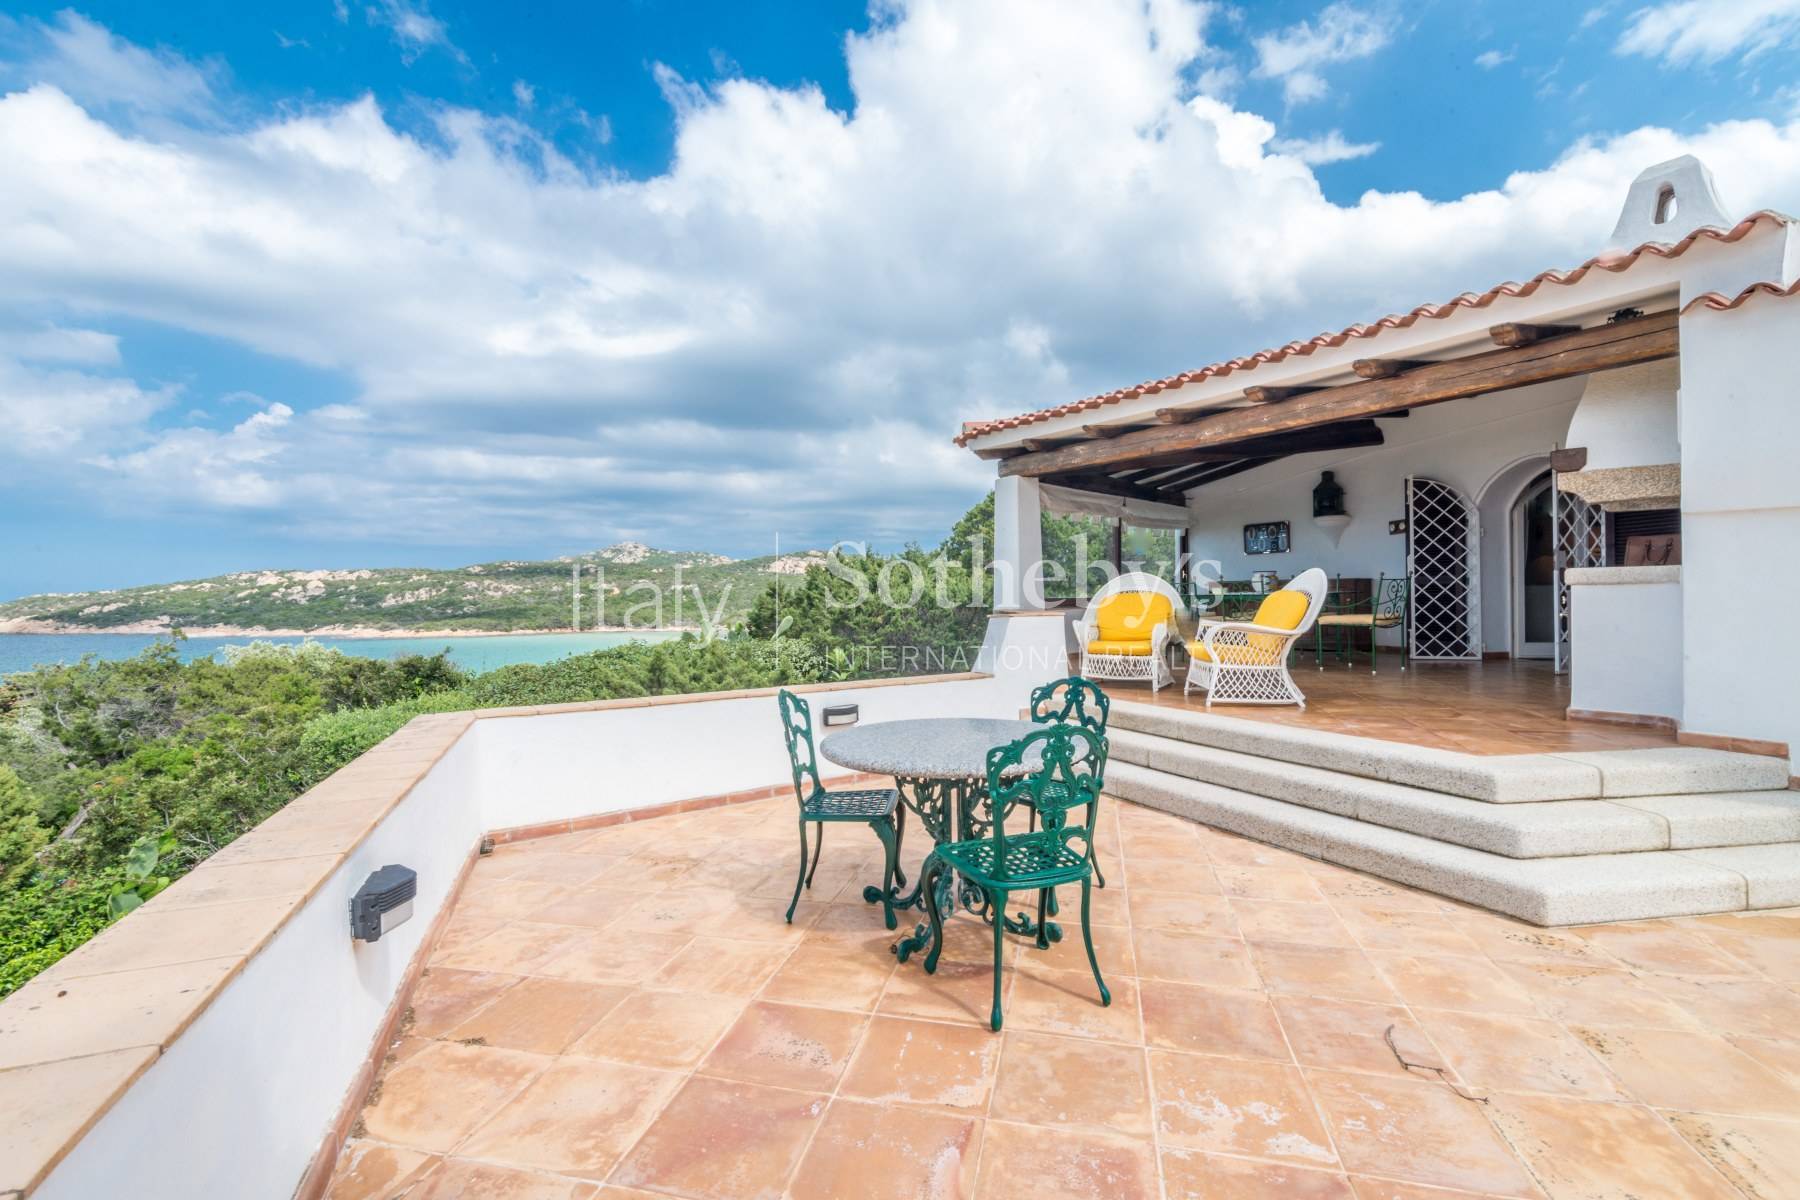 Villa with panoramic view on the Pevero Bay - 3